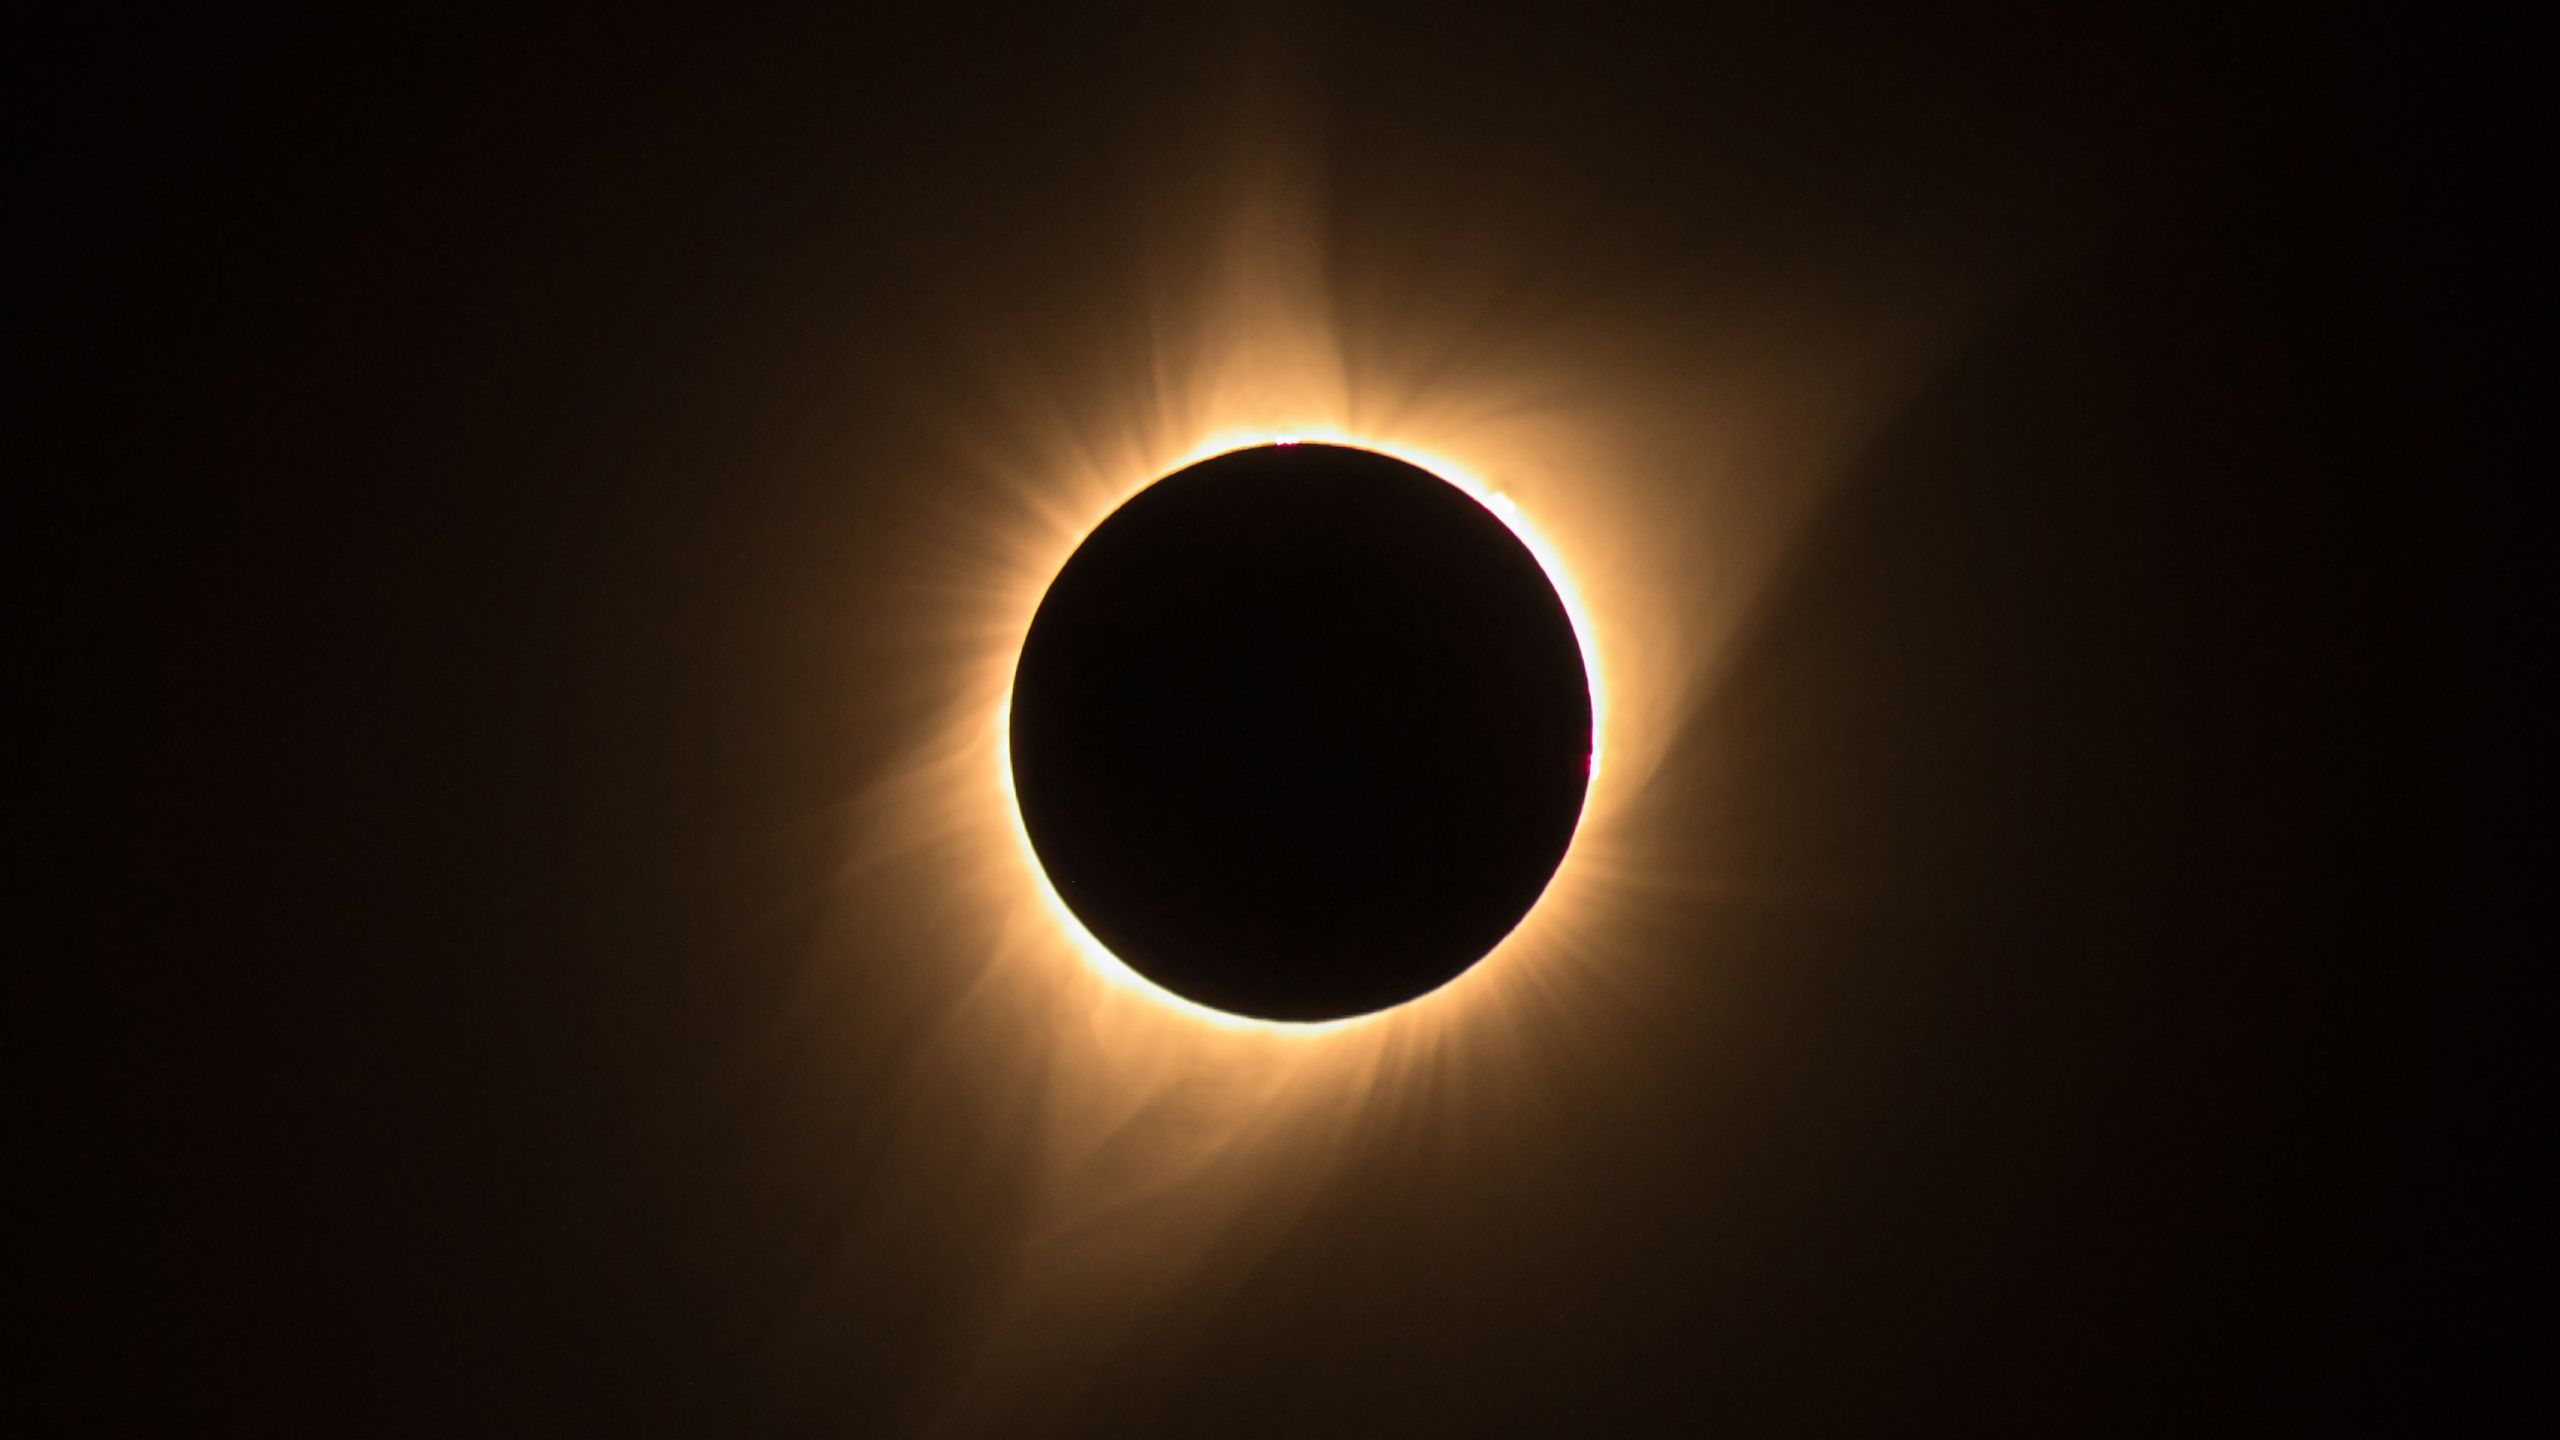 Don't damage your camera: How to photograph the eclipse